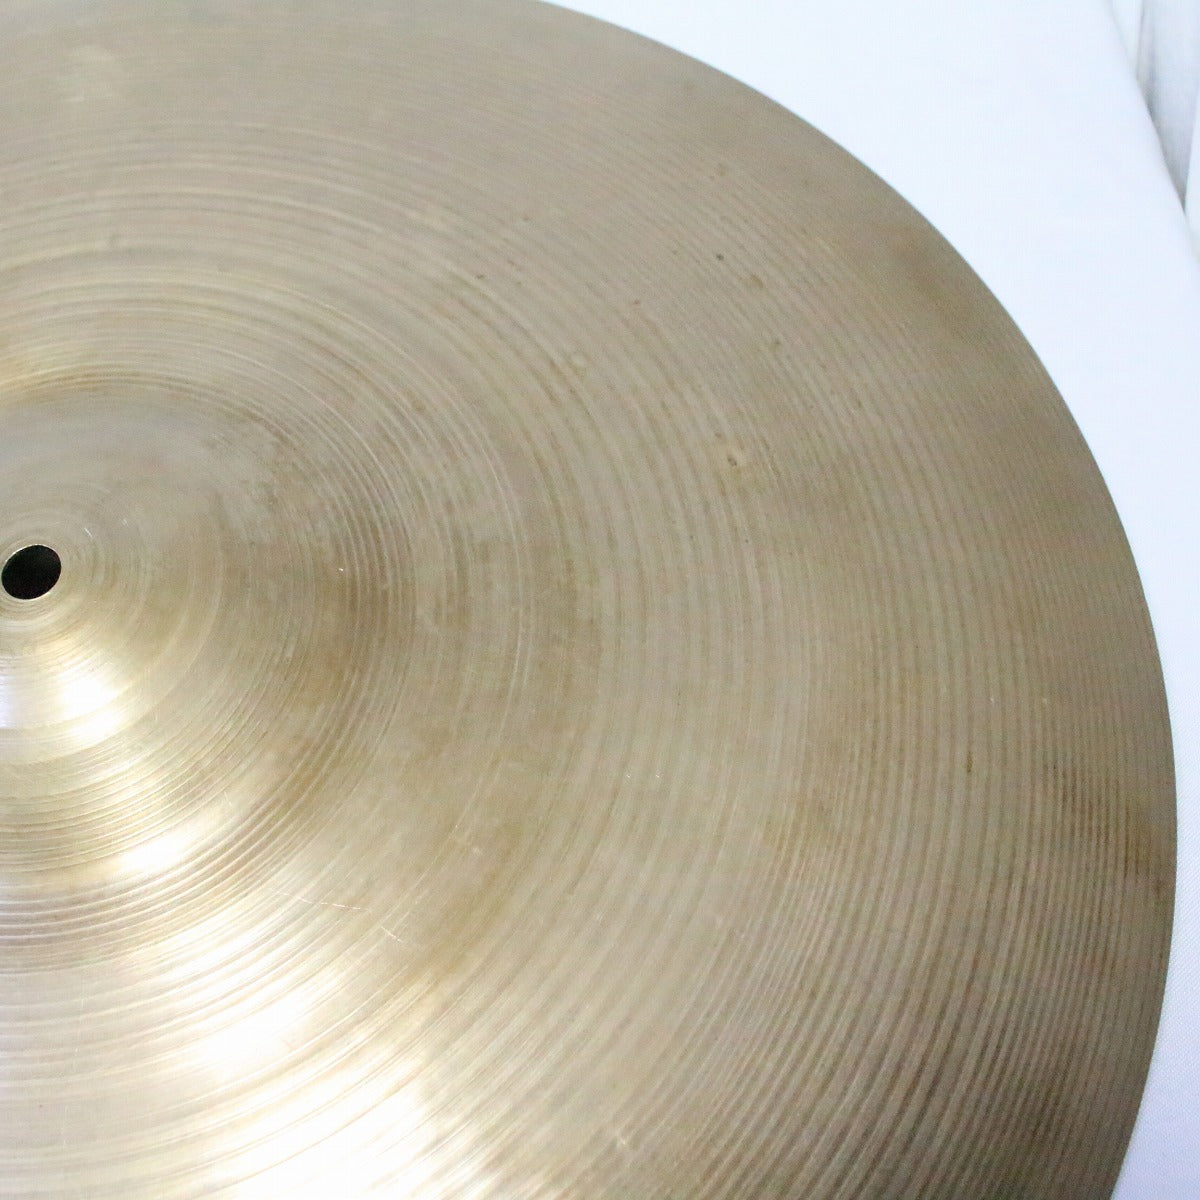 USED ZILDJIAN / Late50s A Small Stamp 20" 2212g Old A Ride Cymbal [08]